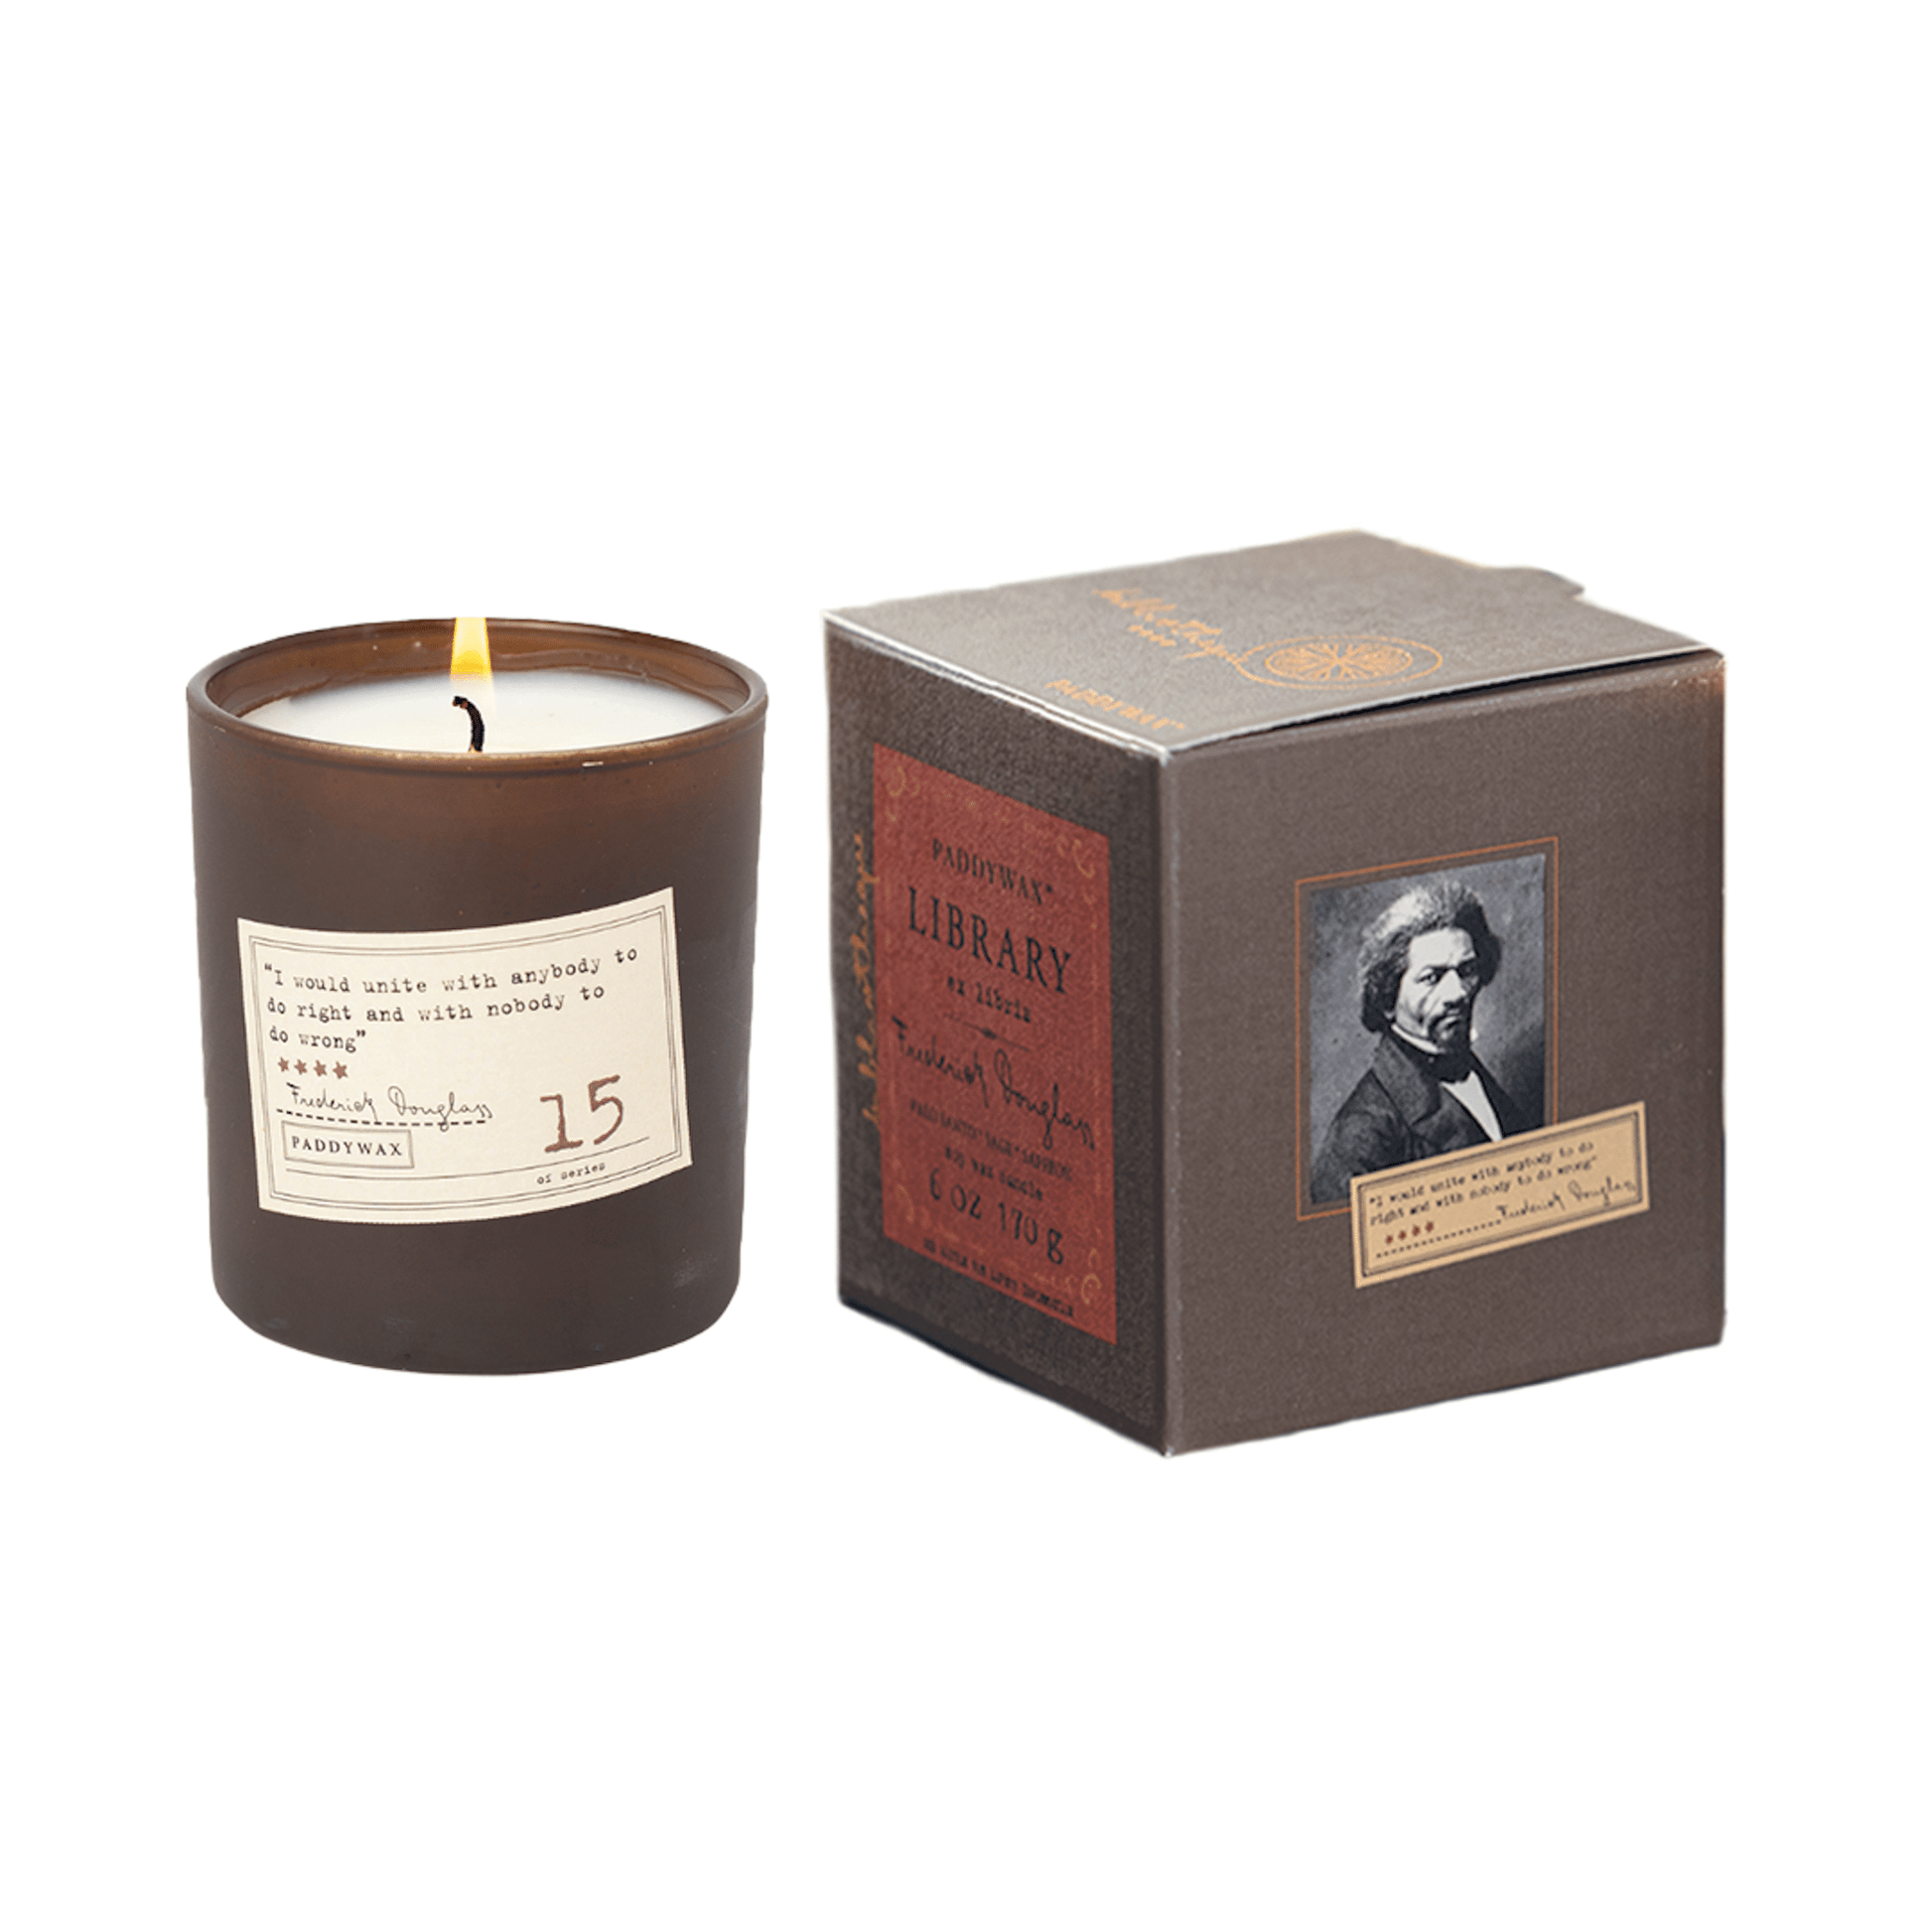 Library 6 oz. Candle - Frederick Douglass and box